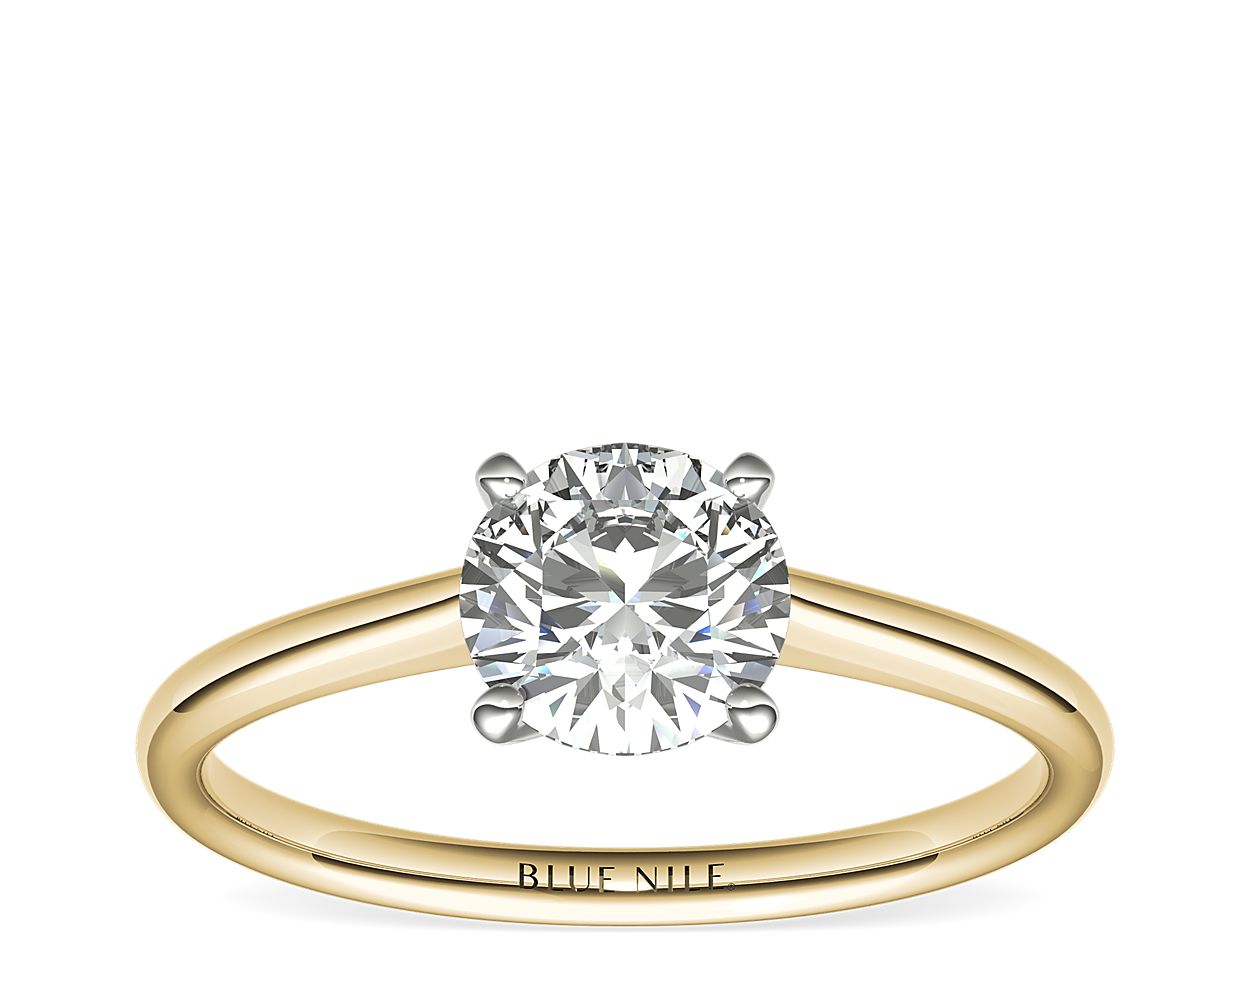 Petite Solitaire Engagement Ring in 14k Yellow Gold 1.00 Carat D-FL Excellent Cut Round Diamond